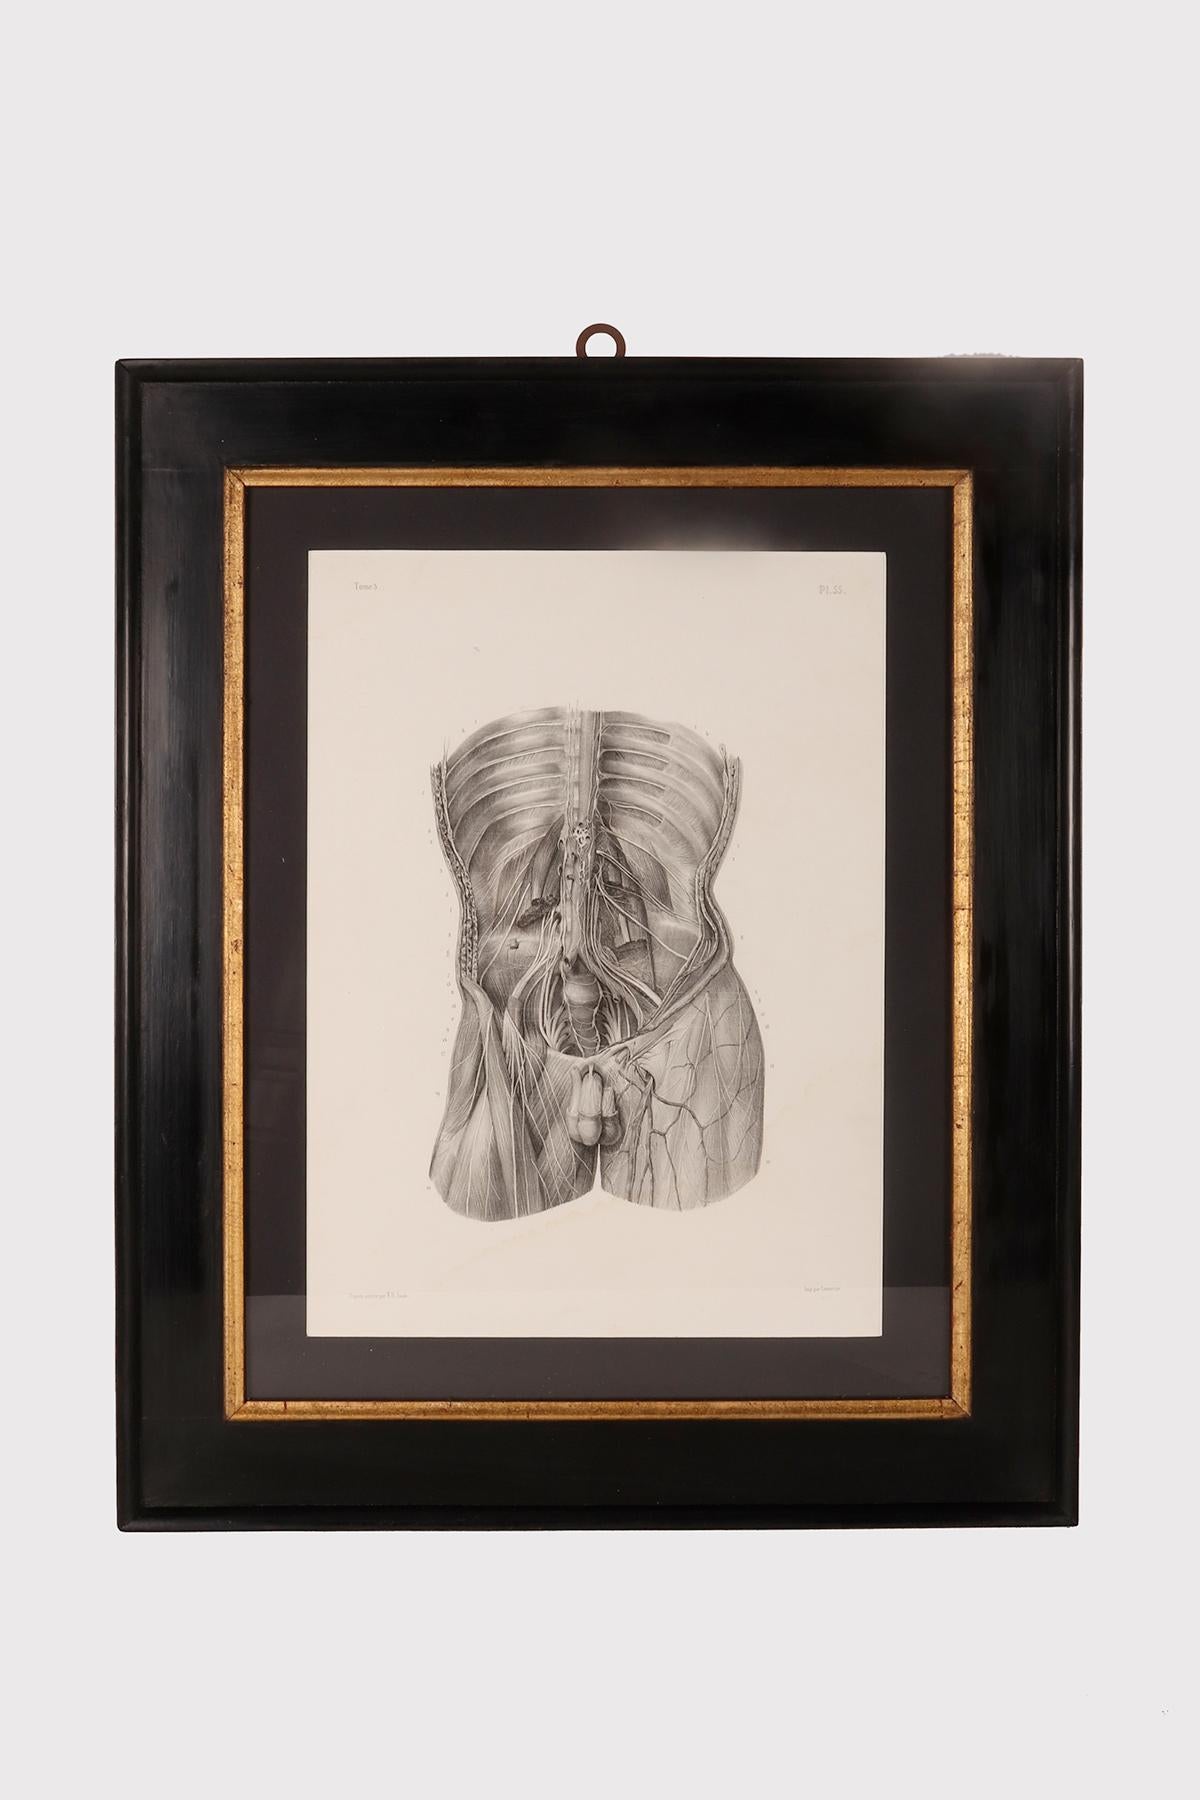 Rare anatomical engraving on paper, dedicated to angiology, a medical specialty reserved for the study of the circulatory system and the lymphatic system, i.e. the veins, arteries and lymphatic vessels. Taken from the complete treatise on the